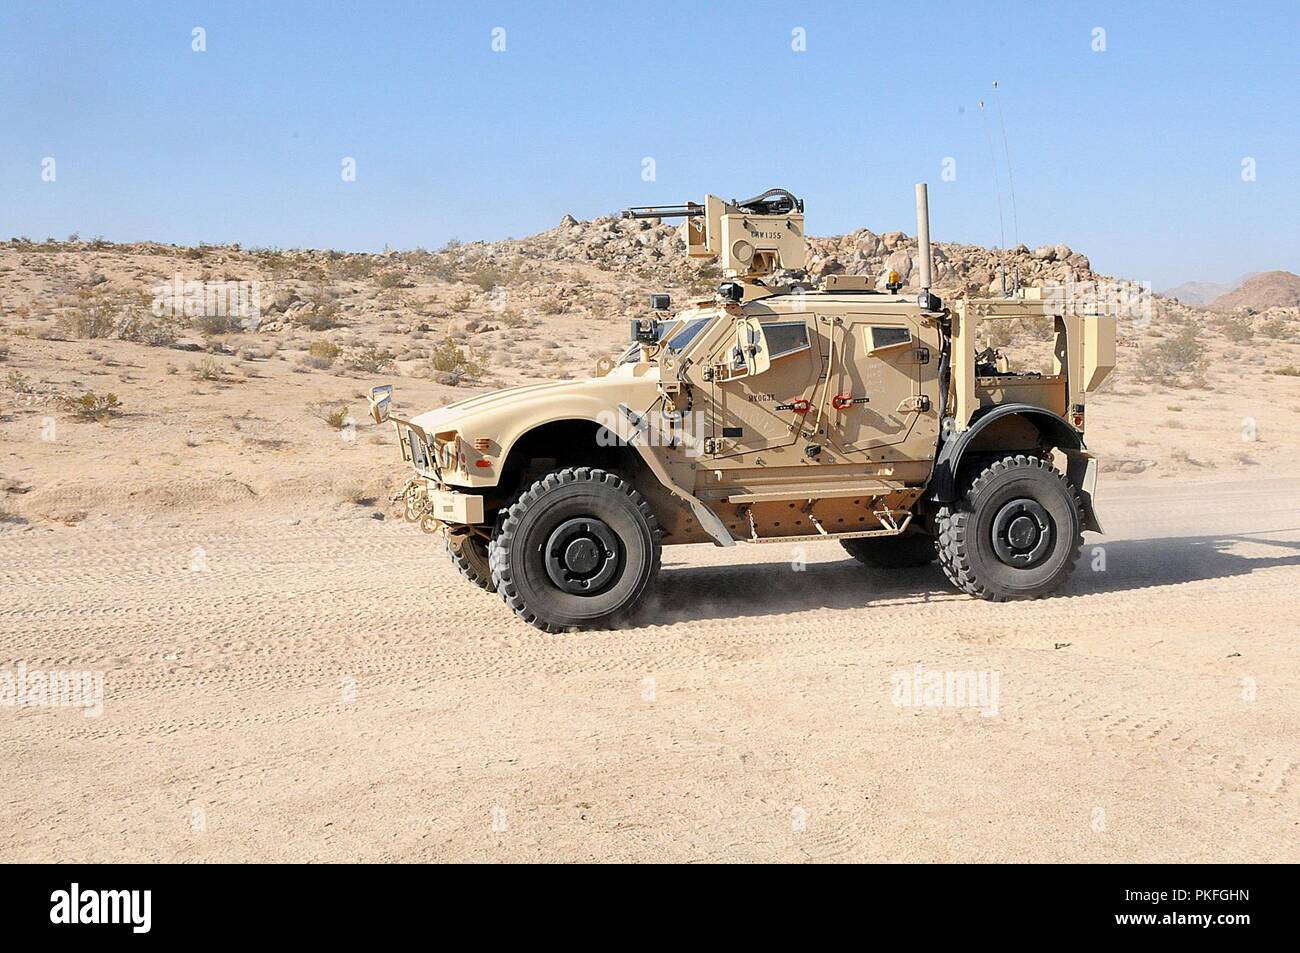 A mine resistant ambush protected vehicle drives en route during a convoy at the National Training Center at Fort Irwin, Calif., Aug. 7, 2018. The MRAP is part of the 1067th Composite Truck Company, Pennsylvania Army National Guard, which fell underneath the 152nd Combat Sustainment Support Battalion, South Dakota Army National Guard. The primary missions were supply and support convoys to enhance logistics operations to support the warfighter on the battlefield. Stock Photo